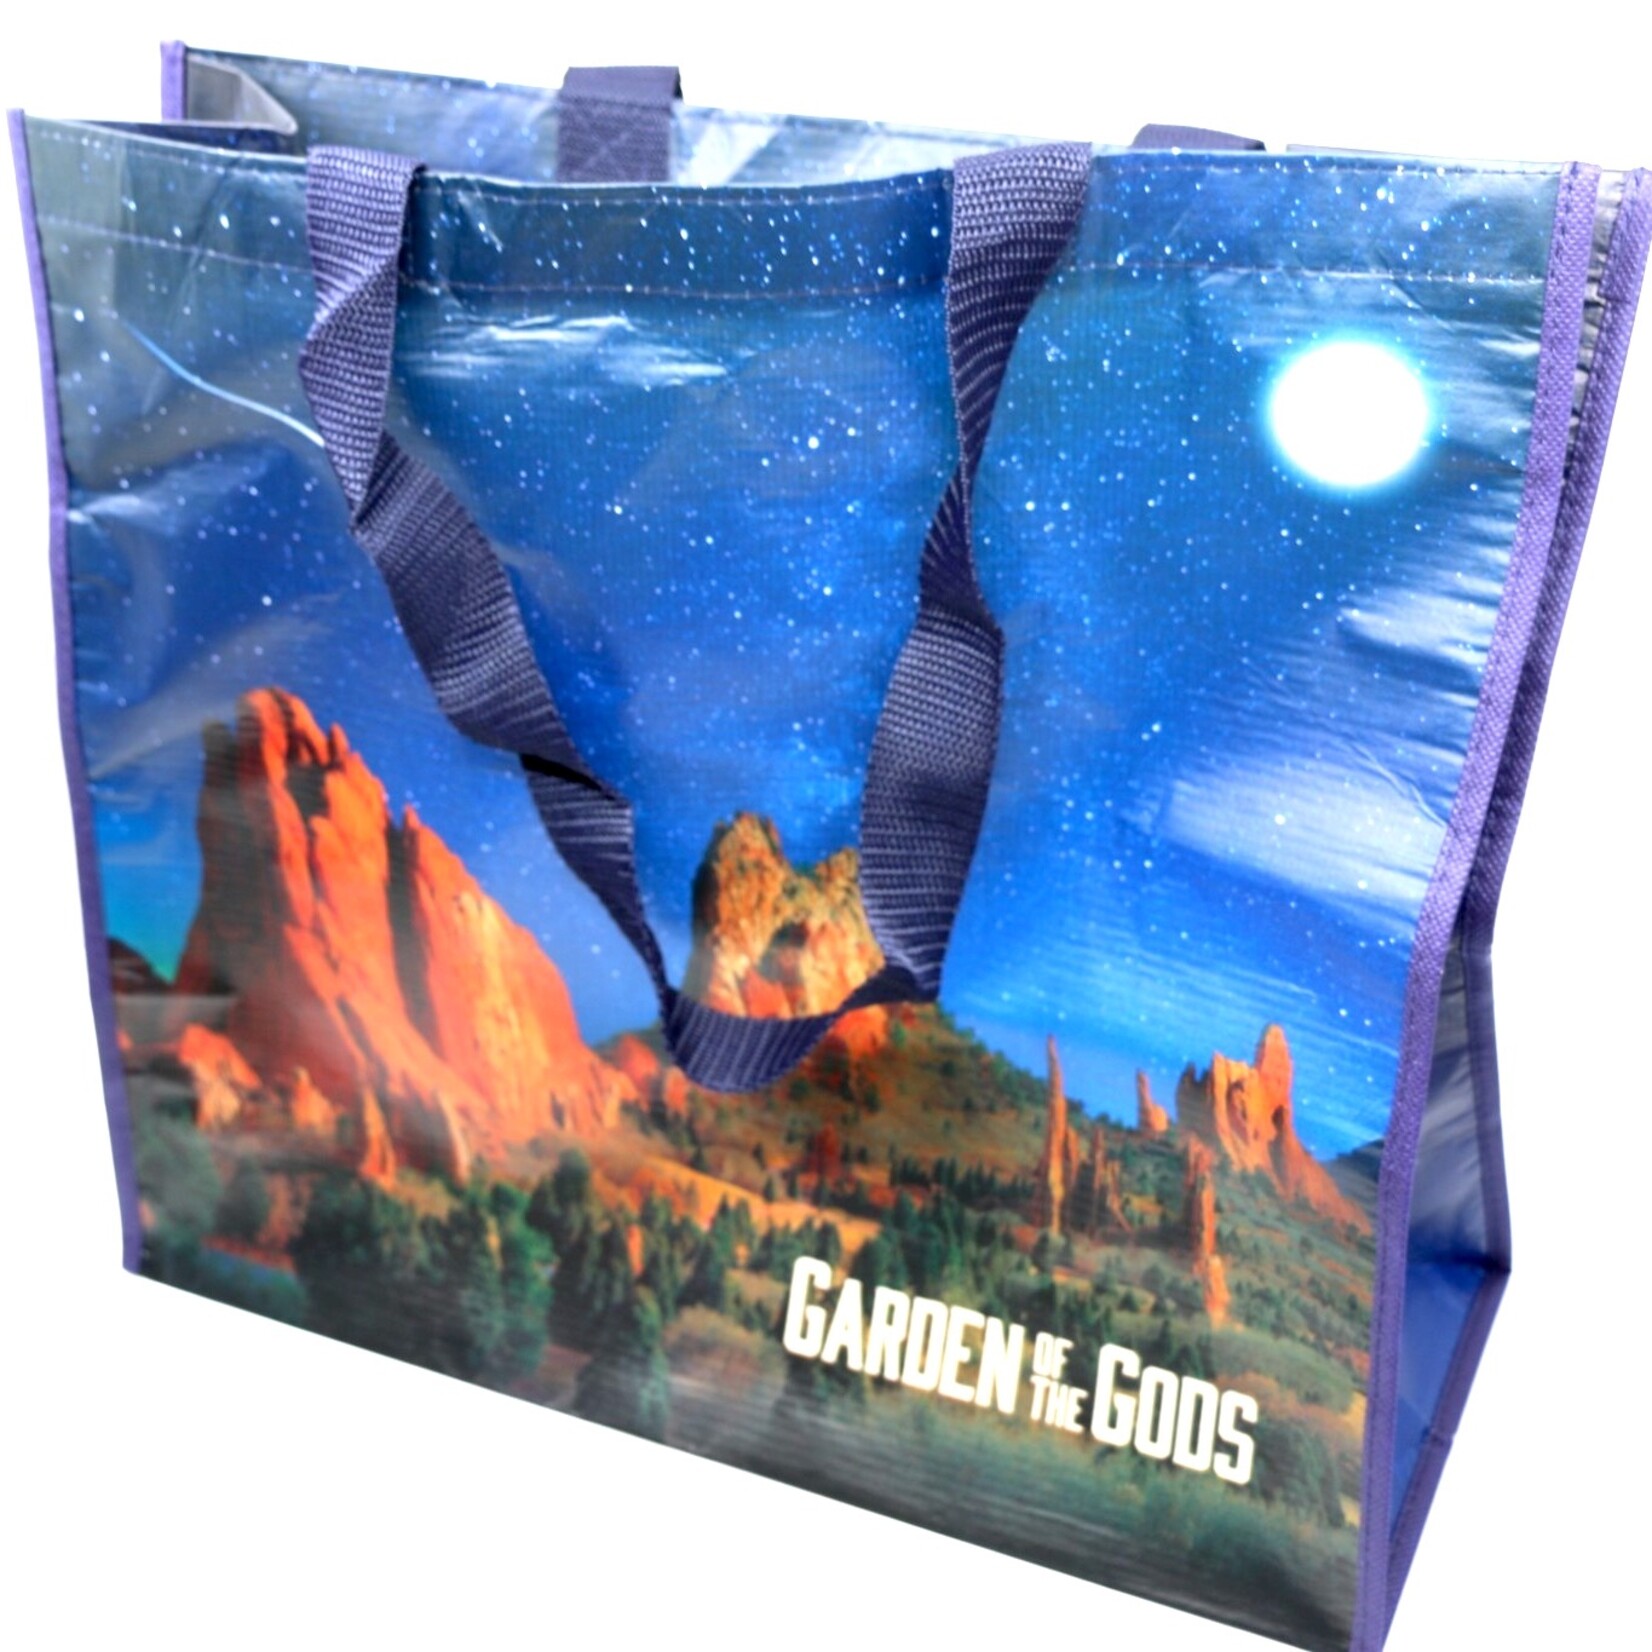 IMPACT COLORADO Garden of the Gods Recycled Tote Bag - Starry Night